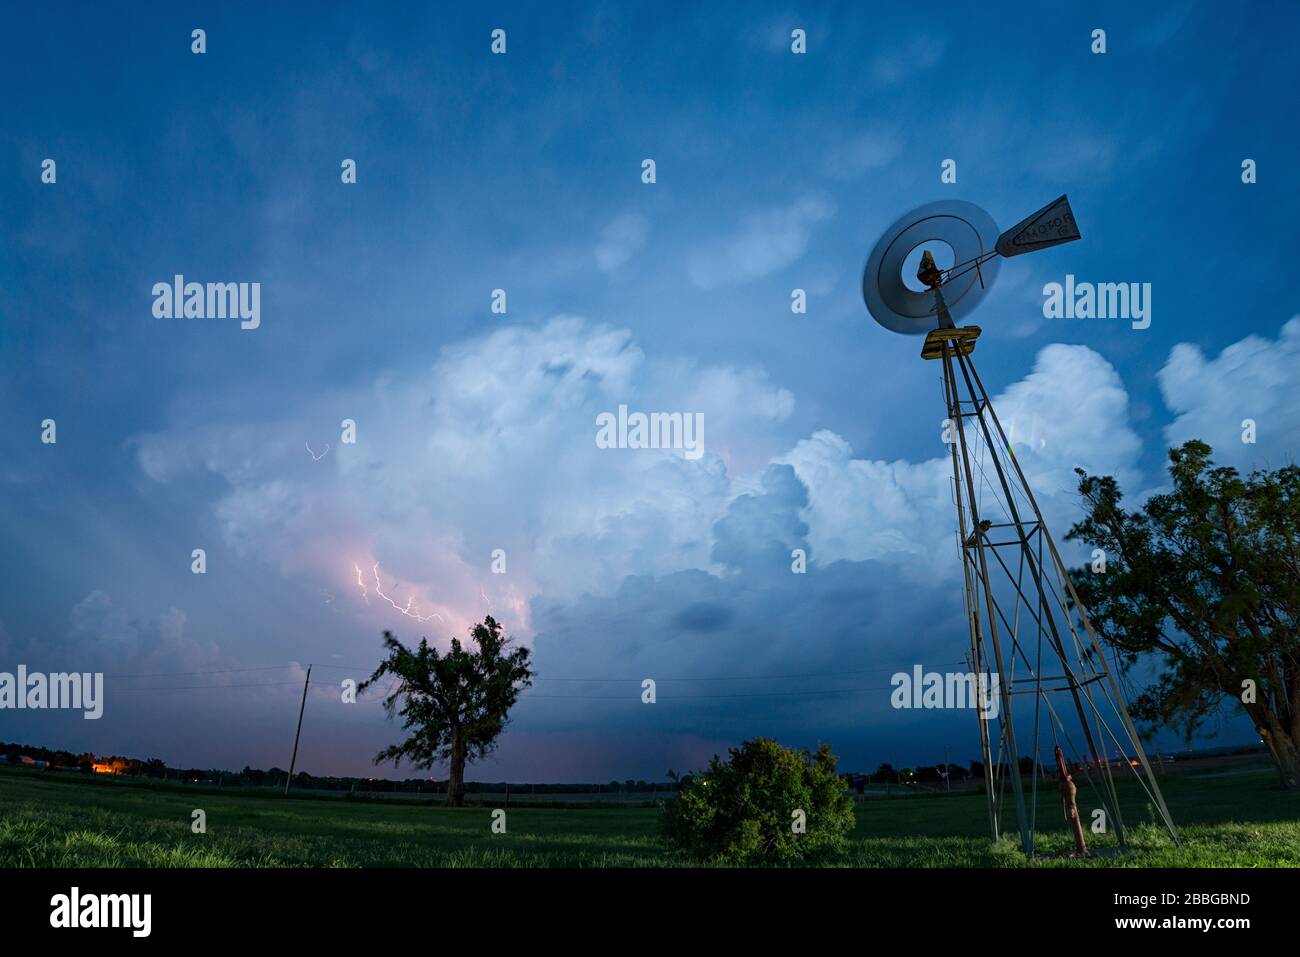 Storm with cloud to cloud lightning flashing over old farm windmill in Texas United States Stock Photo